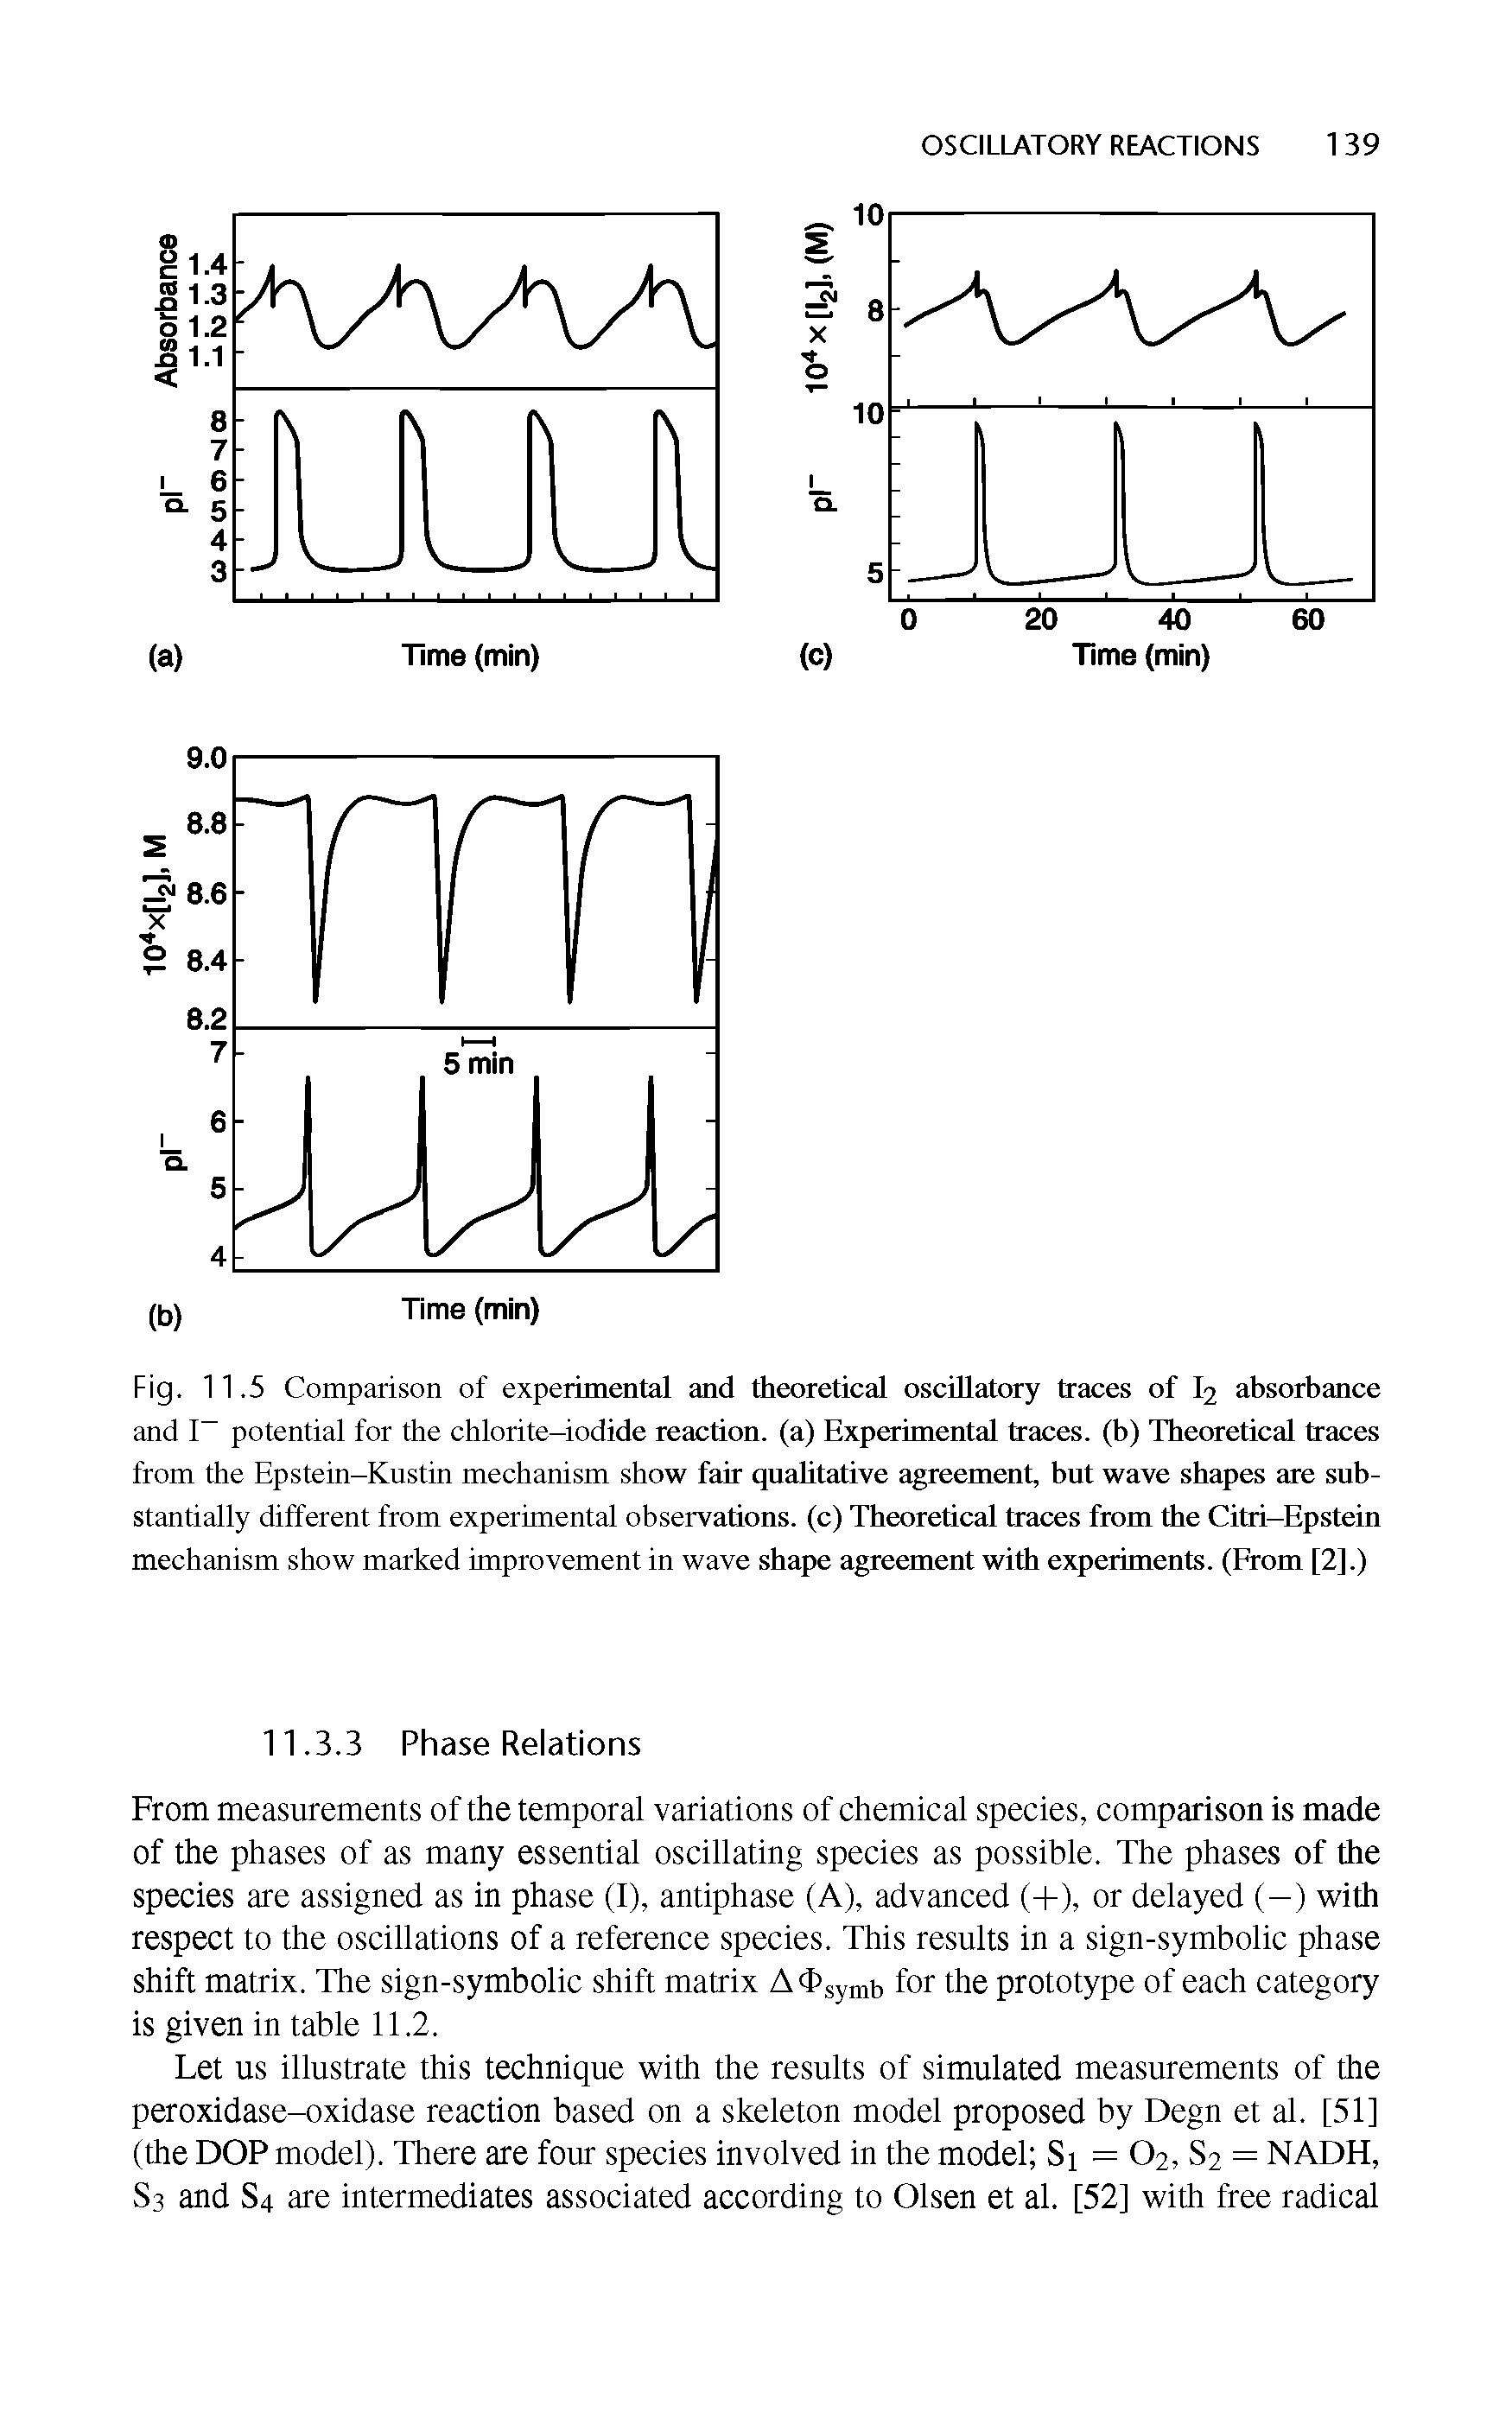 Fig. 11.5 Comparison of experimental and theoretical oscillatory traces of I2 absorbance and 1 potential for the chlorite-iodide reaction, (a) Experimental traces, (b) Theoretical traces from the Epstein-Kustin mechanism show fair qnahtative agreement, bnt wave shapes are snb-stantially different from experimental observations, (c) Theoretical traces from the Citri-Epstein mechanism show marked improvement in wave shape agreement with experiments. (Erom [2].)...